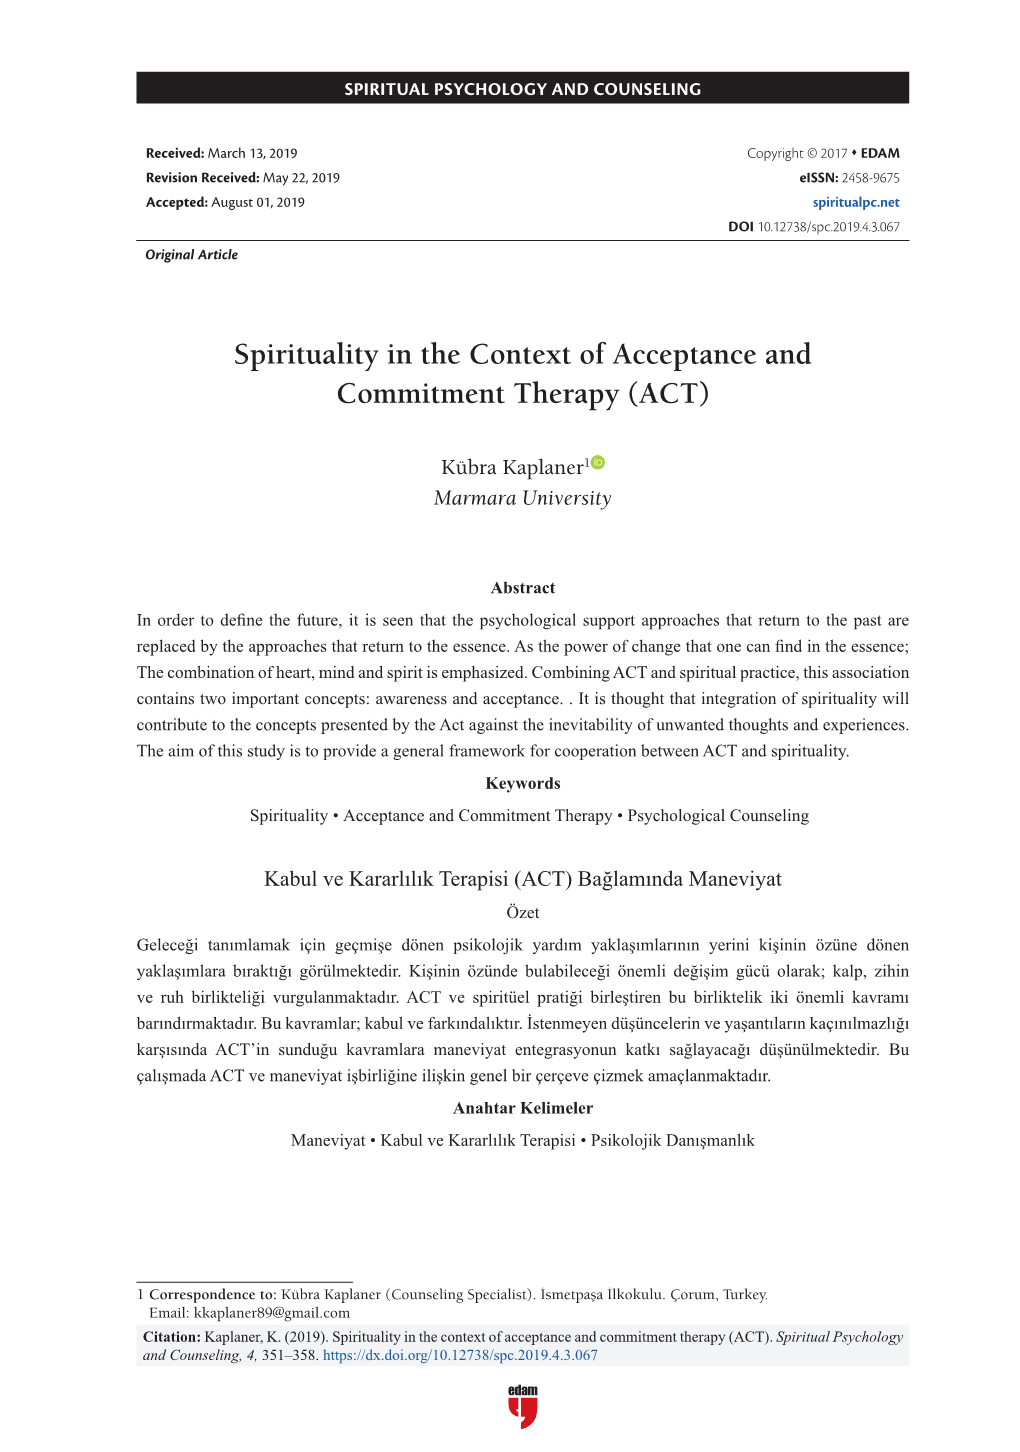 Spirituality in the Context of Acceptance and Commitment Therapy (ACT)